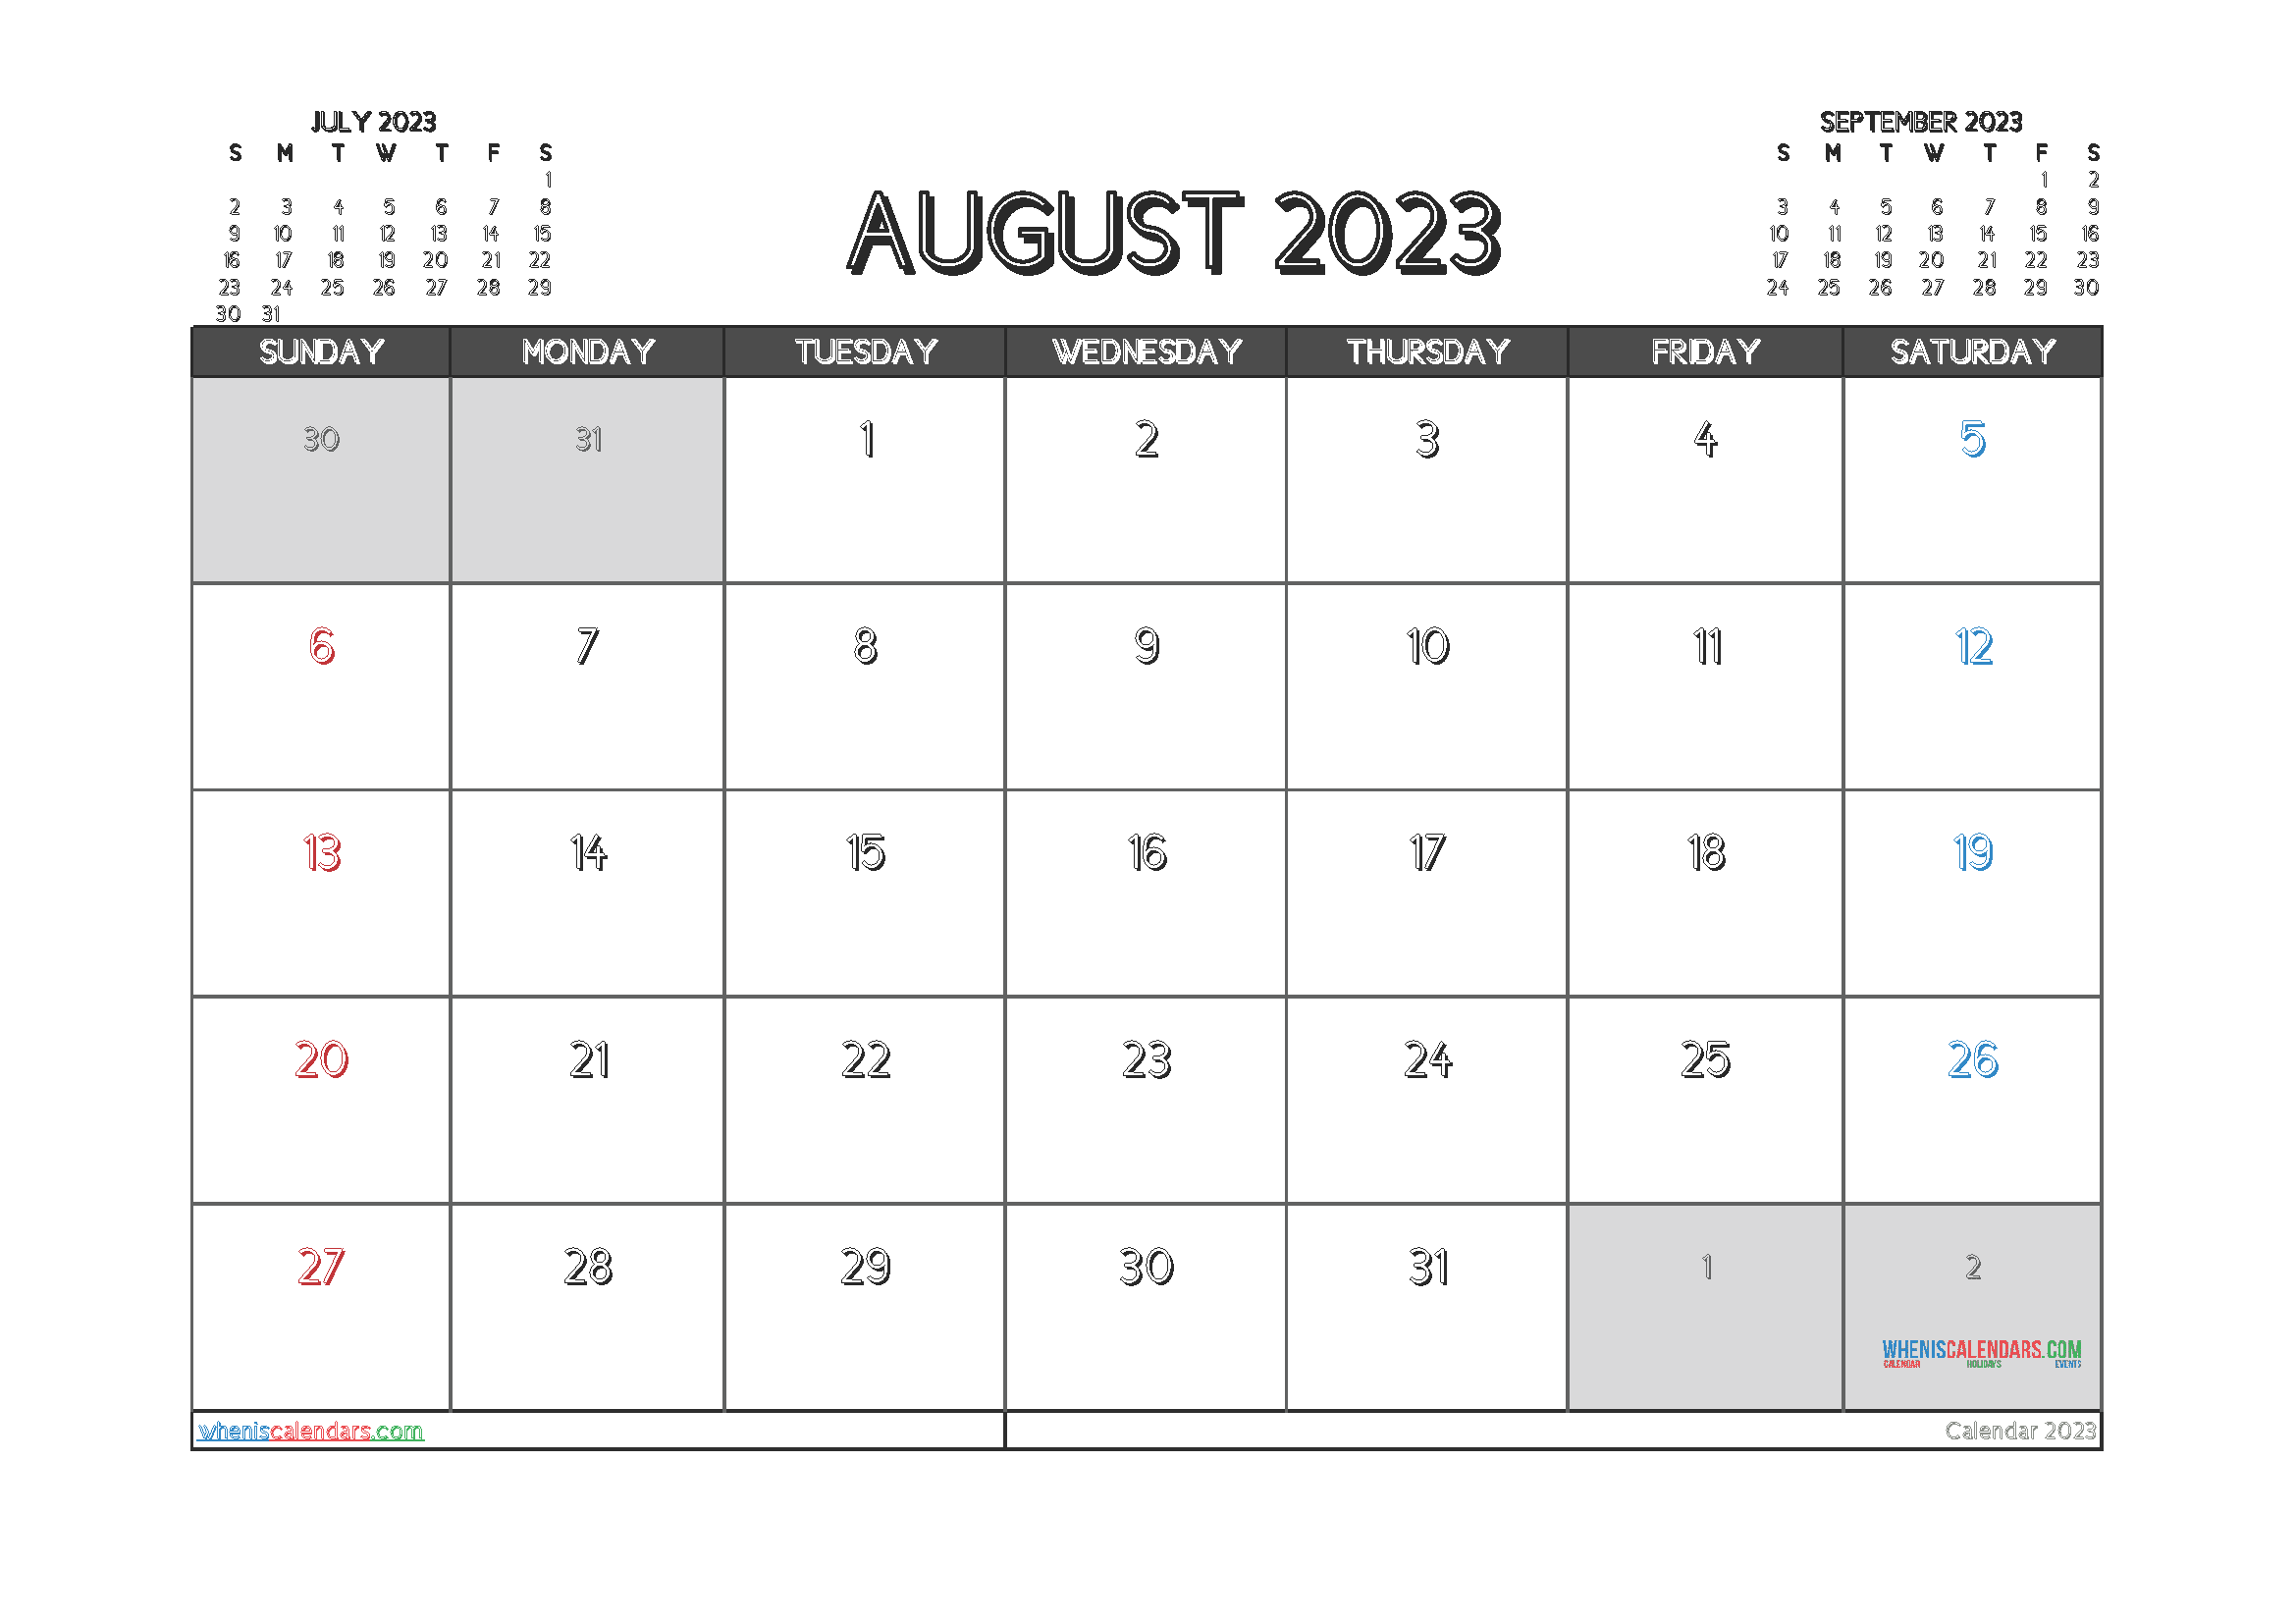 Free Printable Calendar August 2023 with Holidays PDF in Landscape